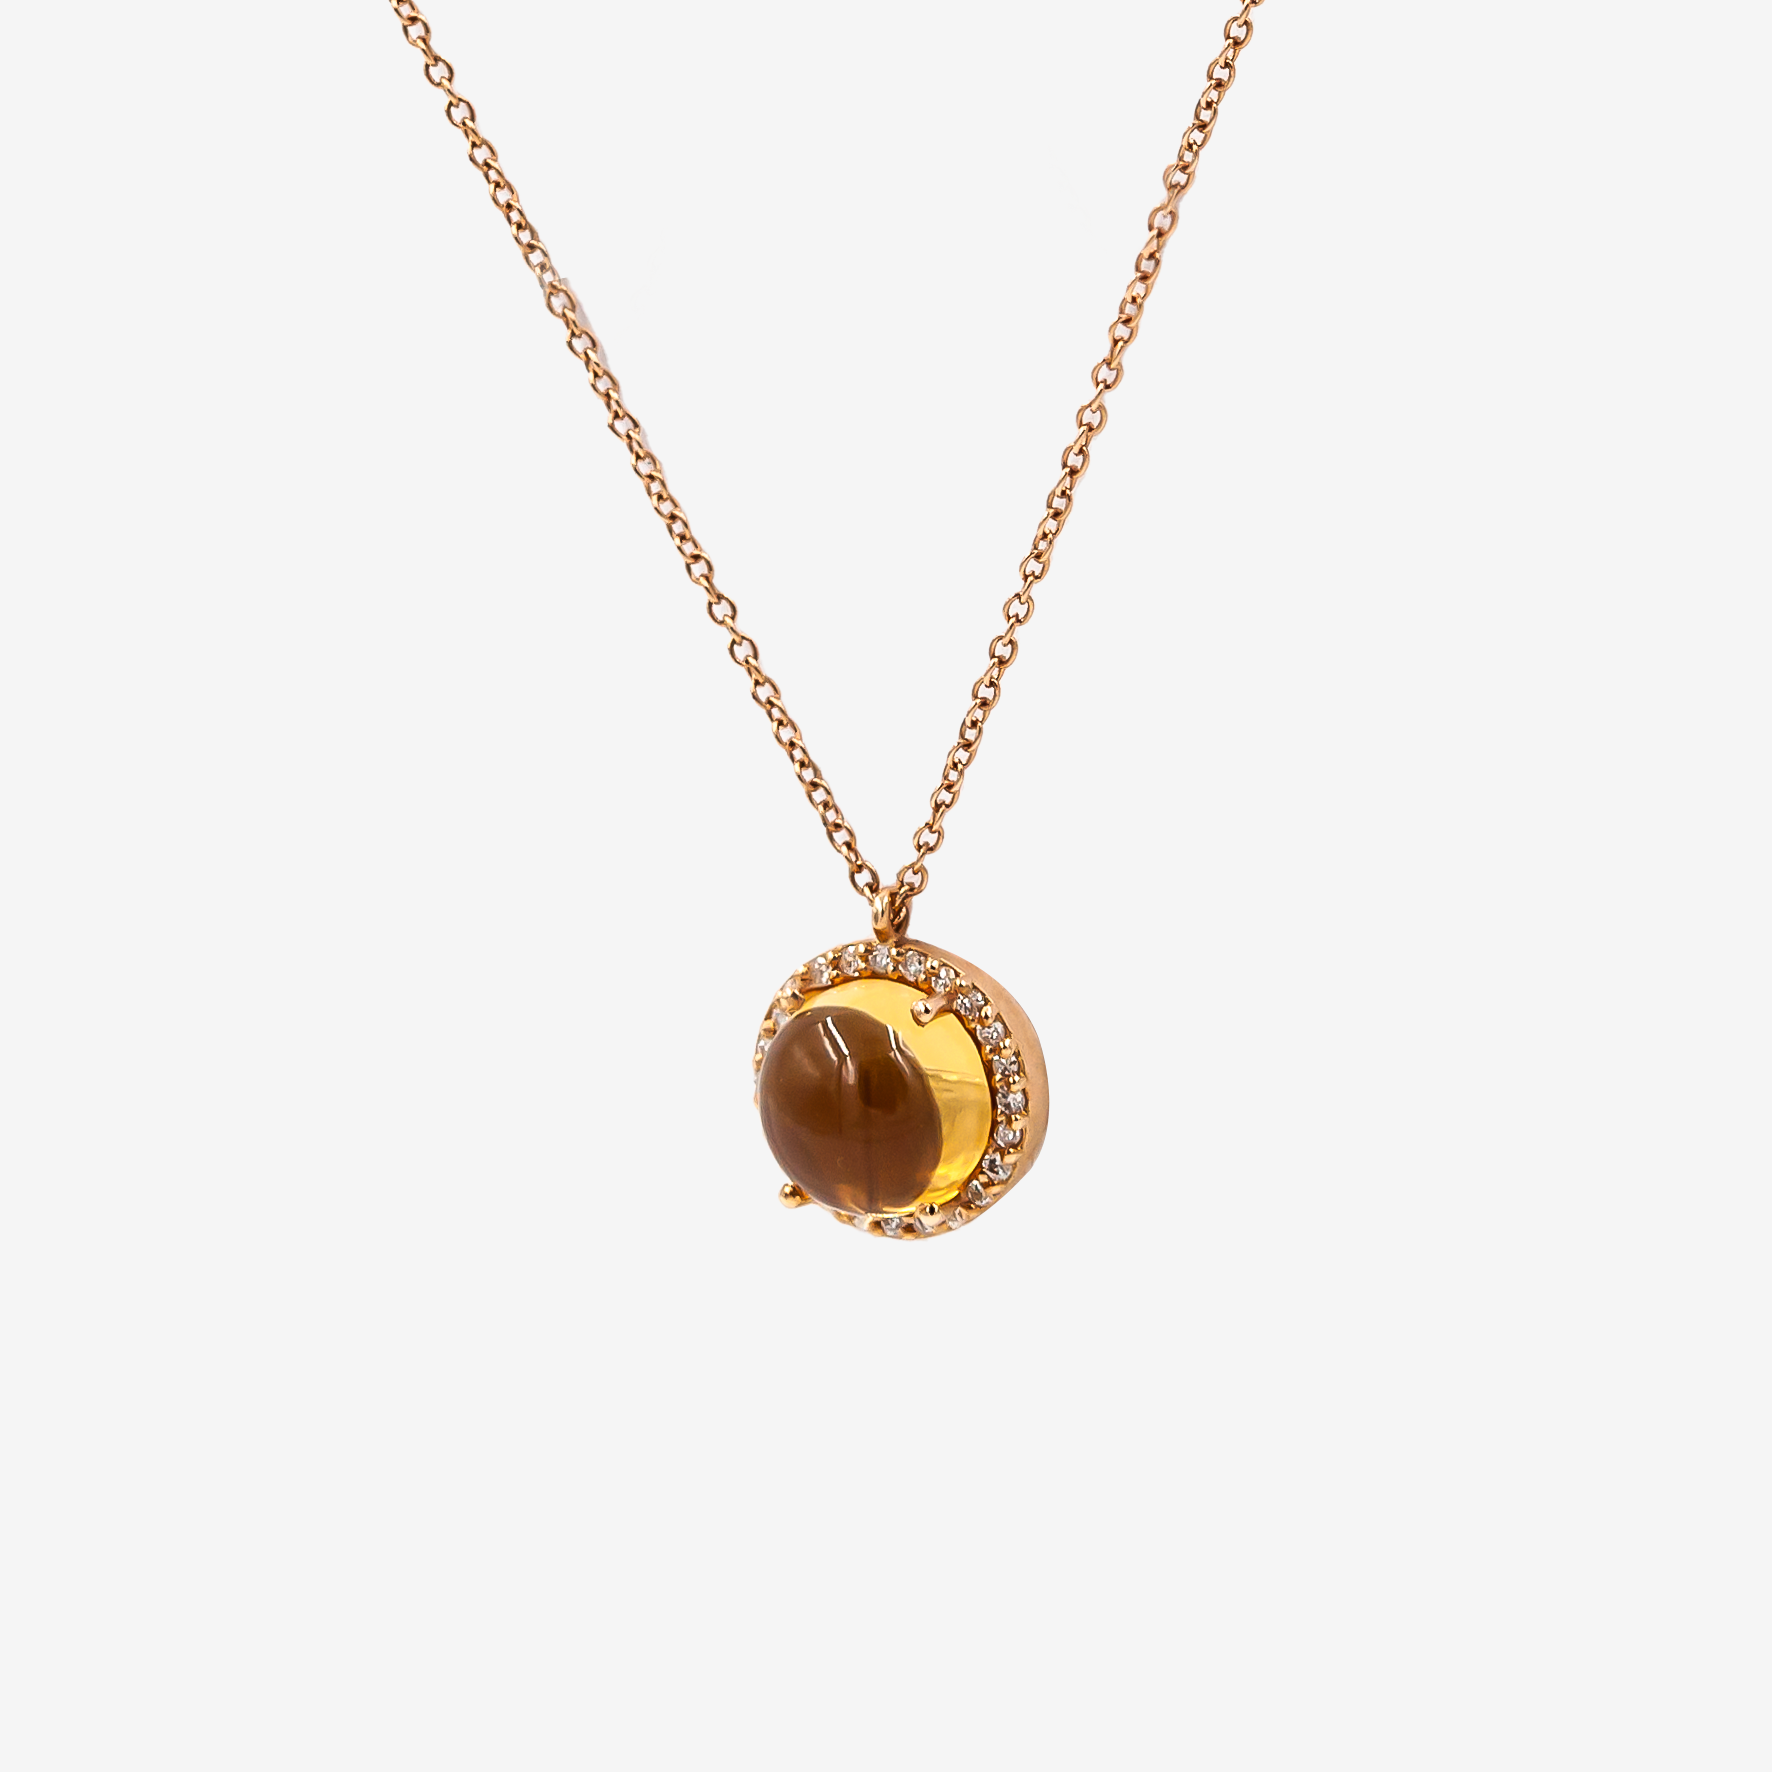 Round necklace with citrine and diamonds